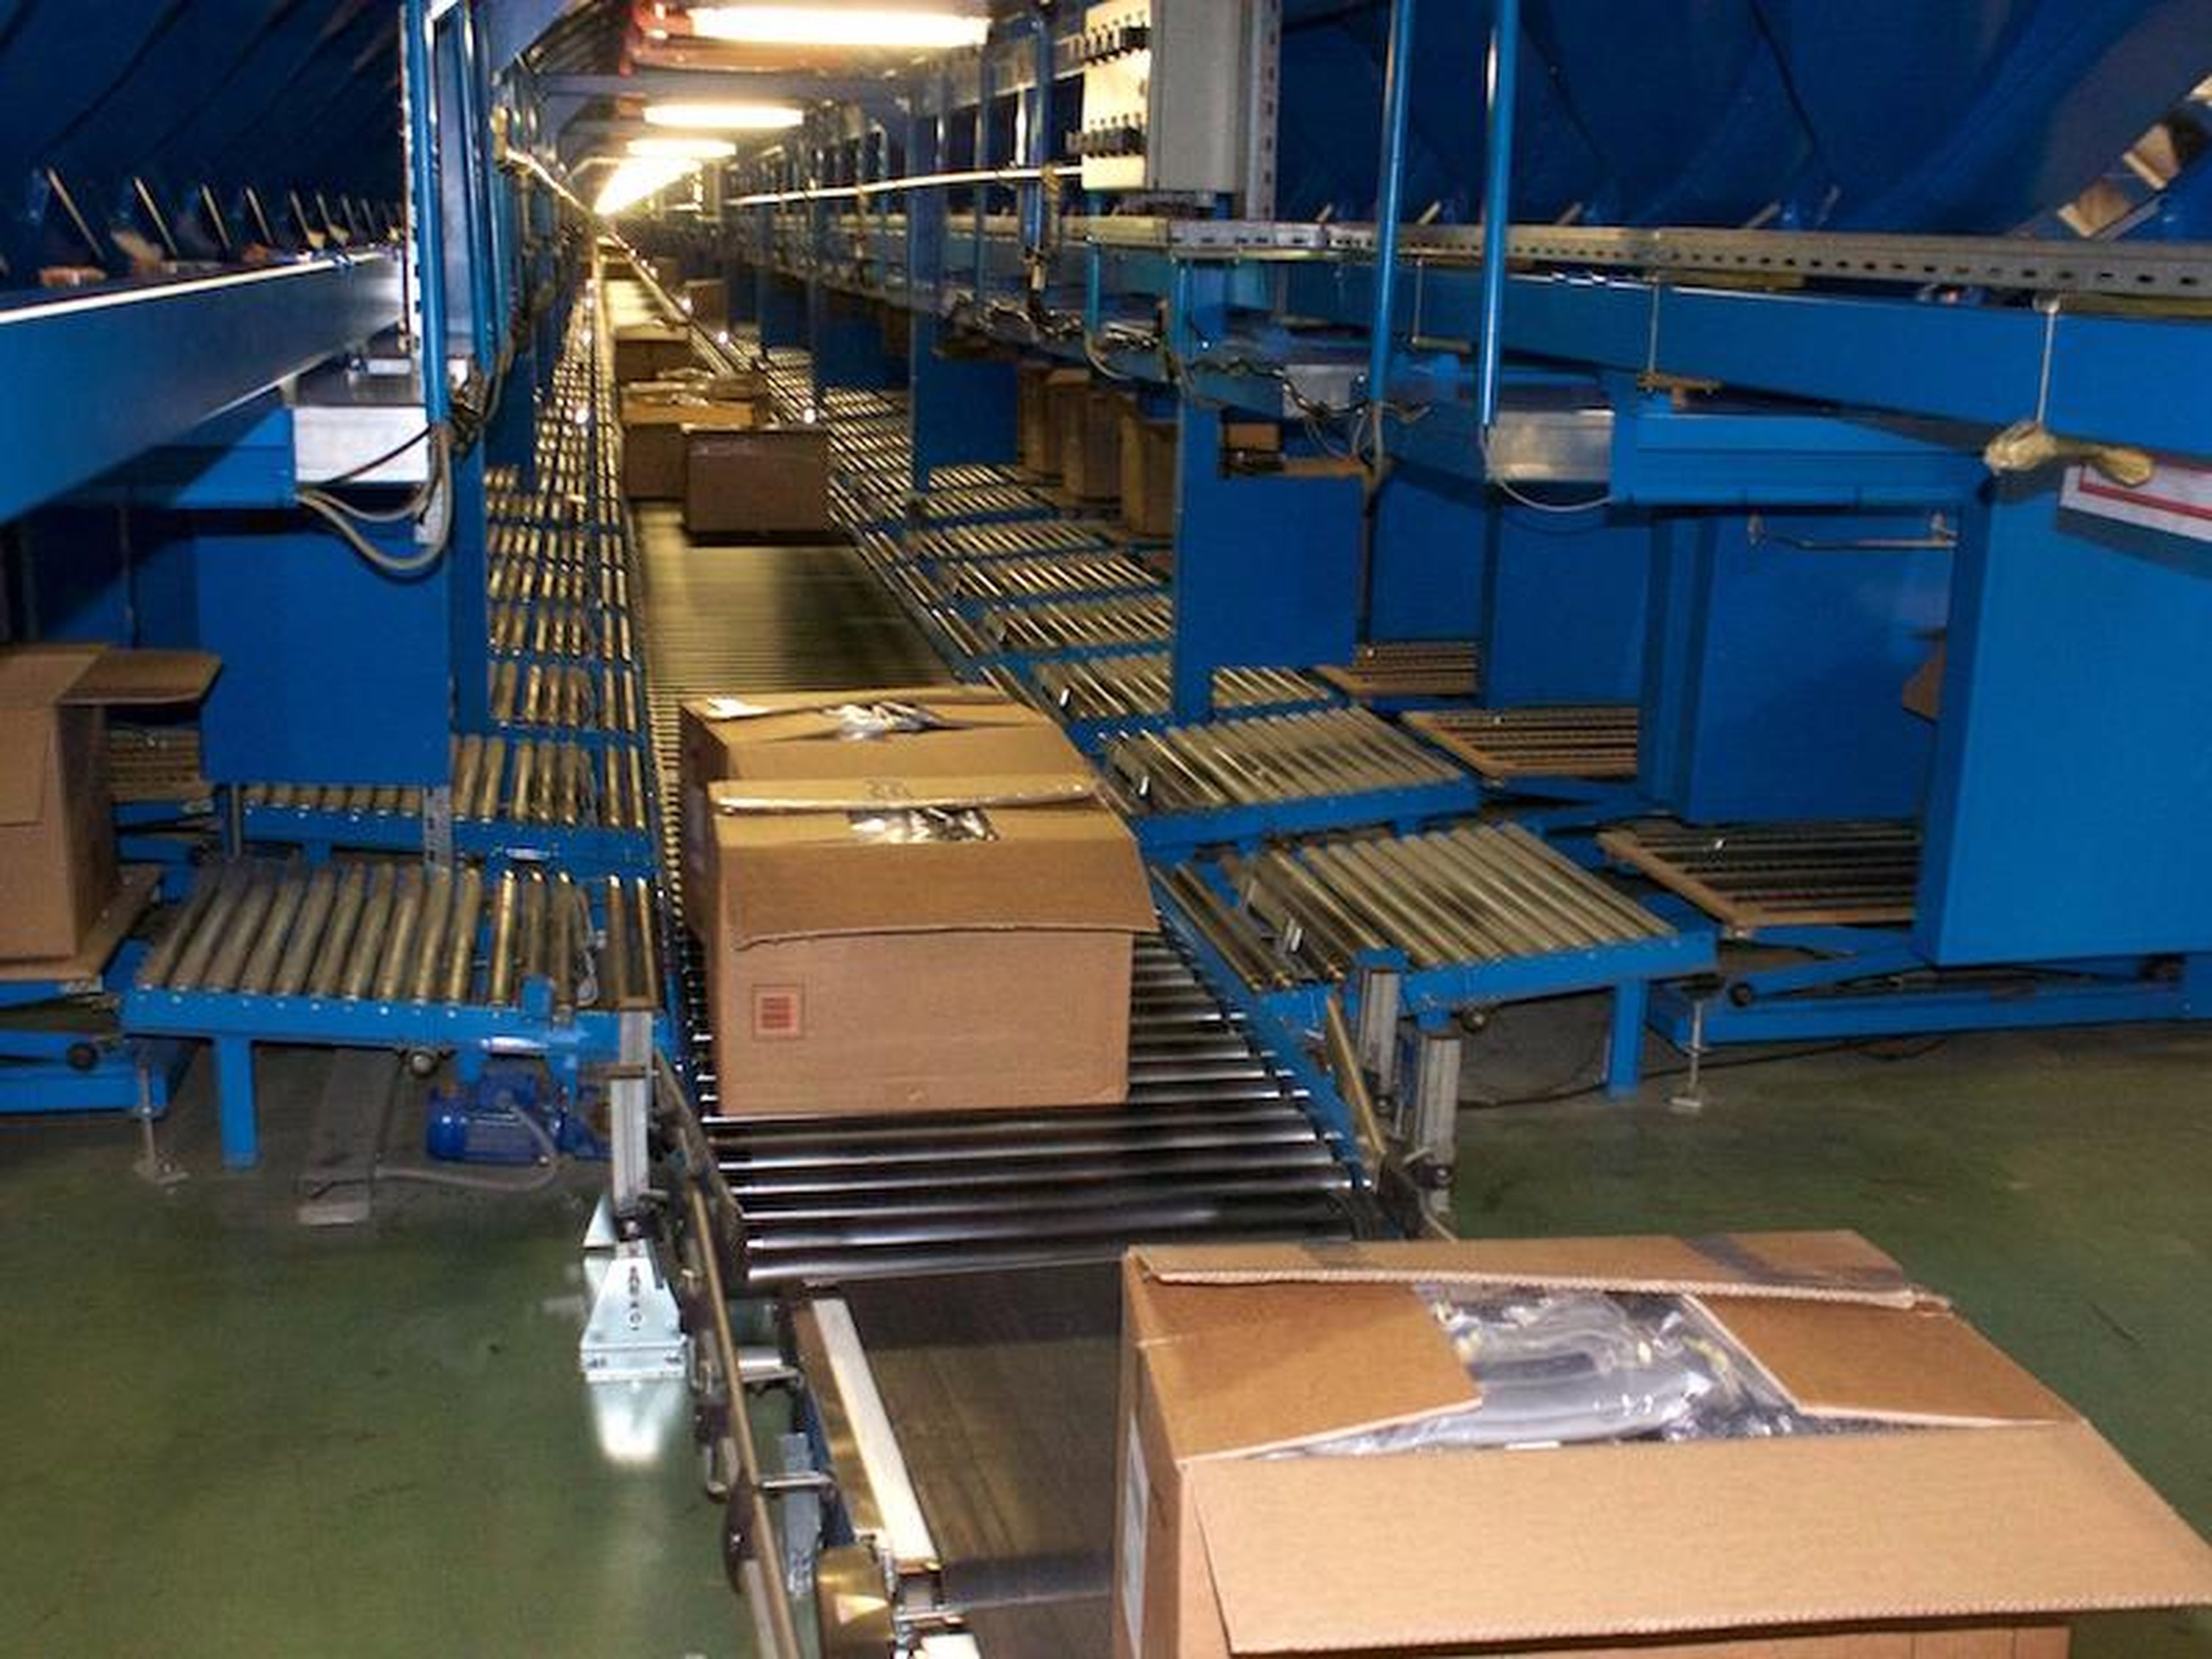 This Zara distribution center is the largest of four in Spain and ships products to Zara's 2,238 stores.